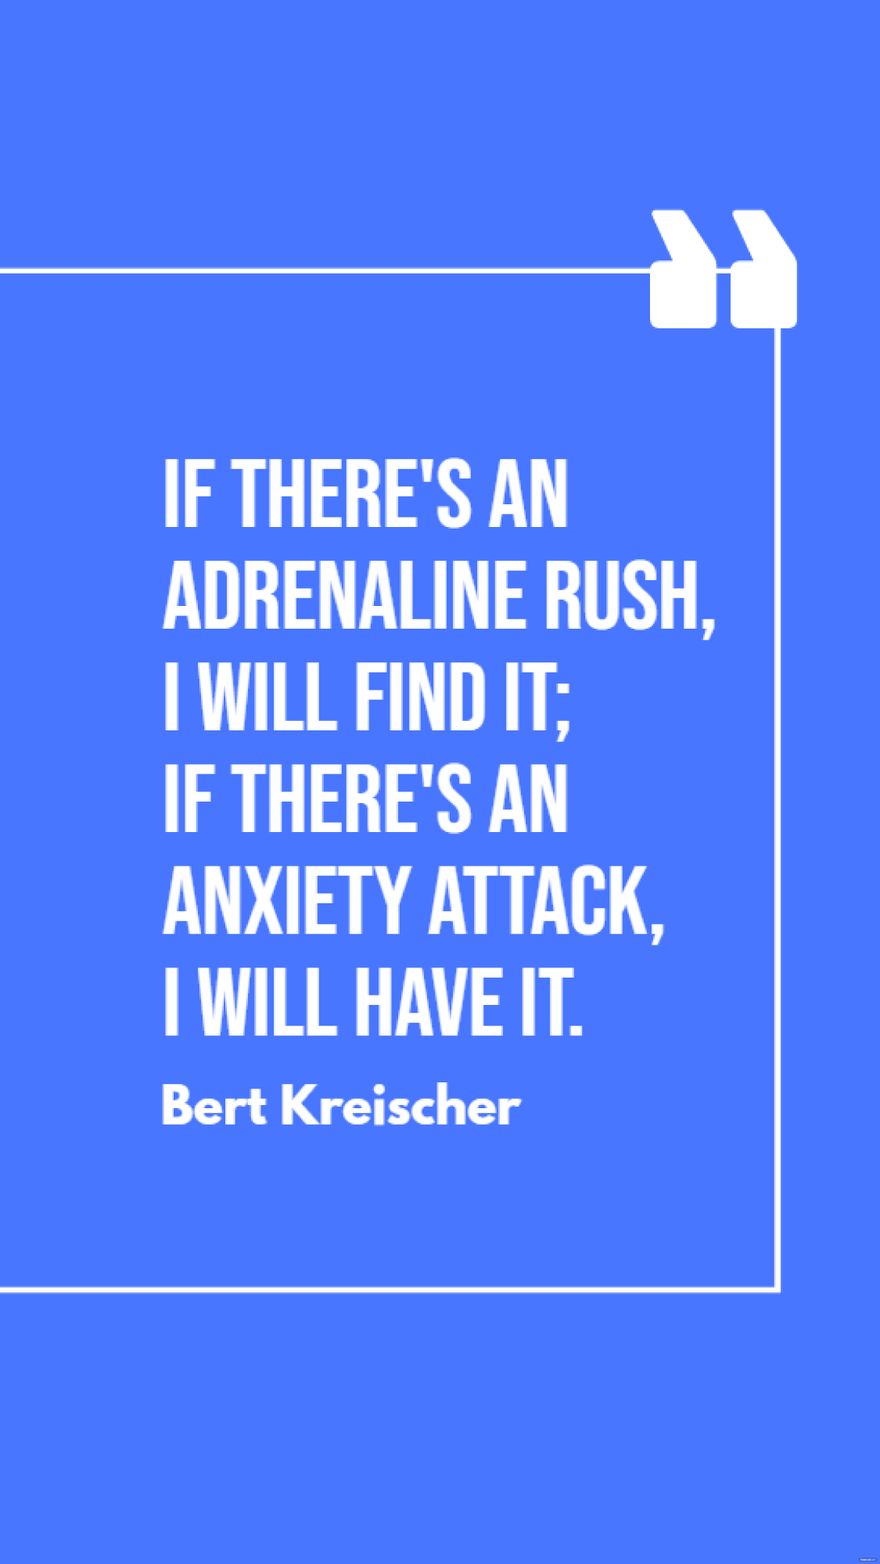 Bert Kreischer - If there's an adrenaline rush, I will find it; if there's an anxiety attack, I will have it. in JPG